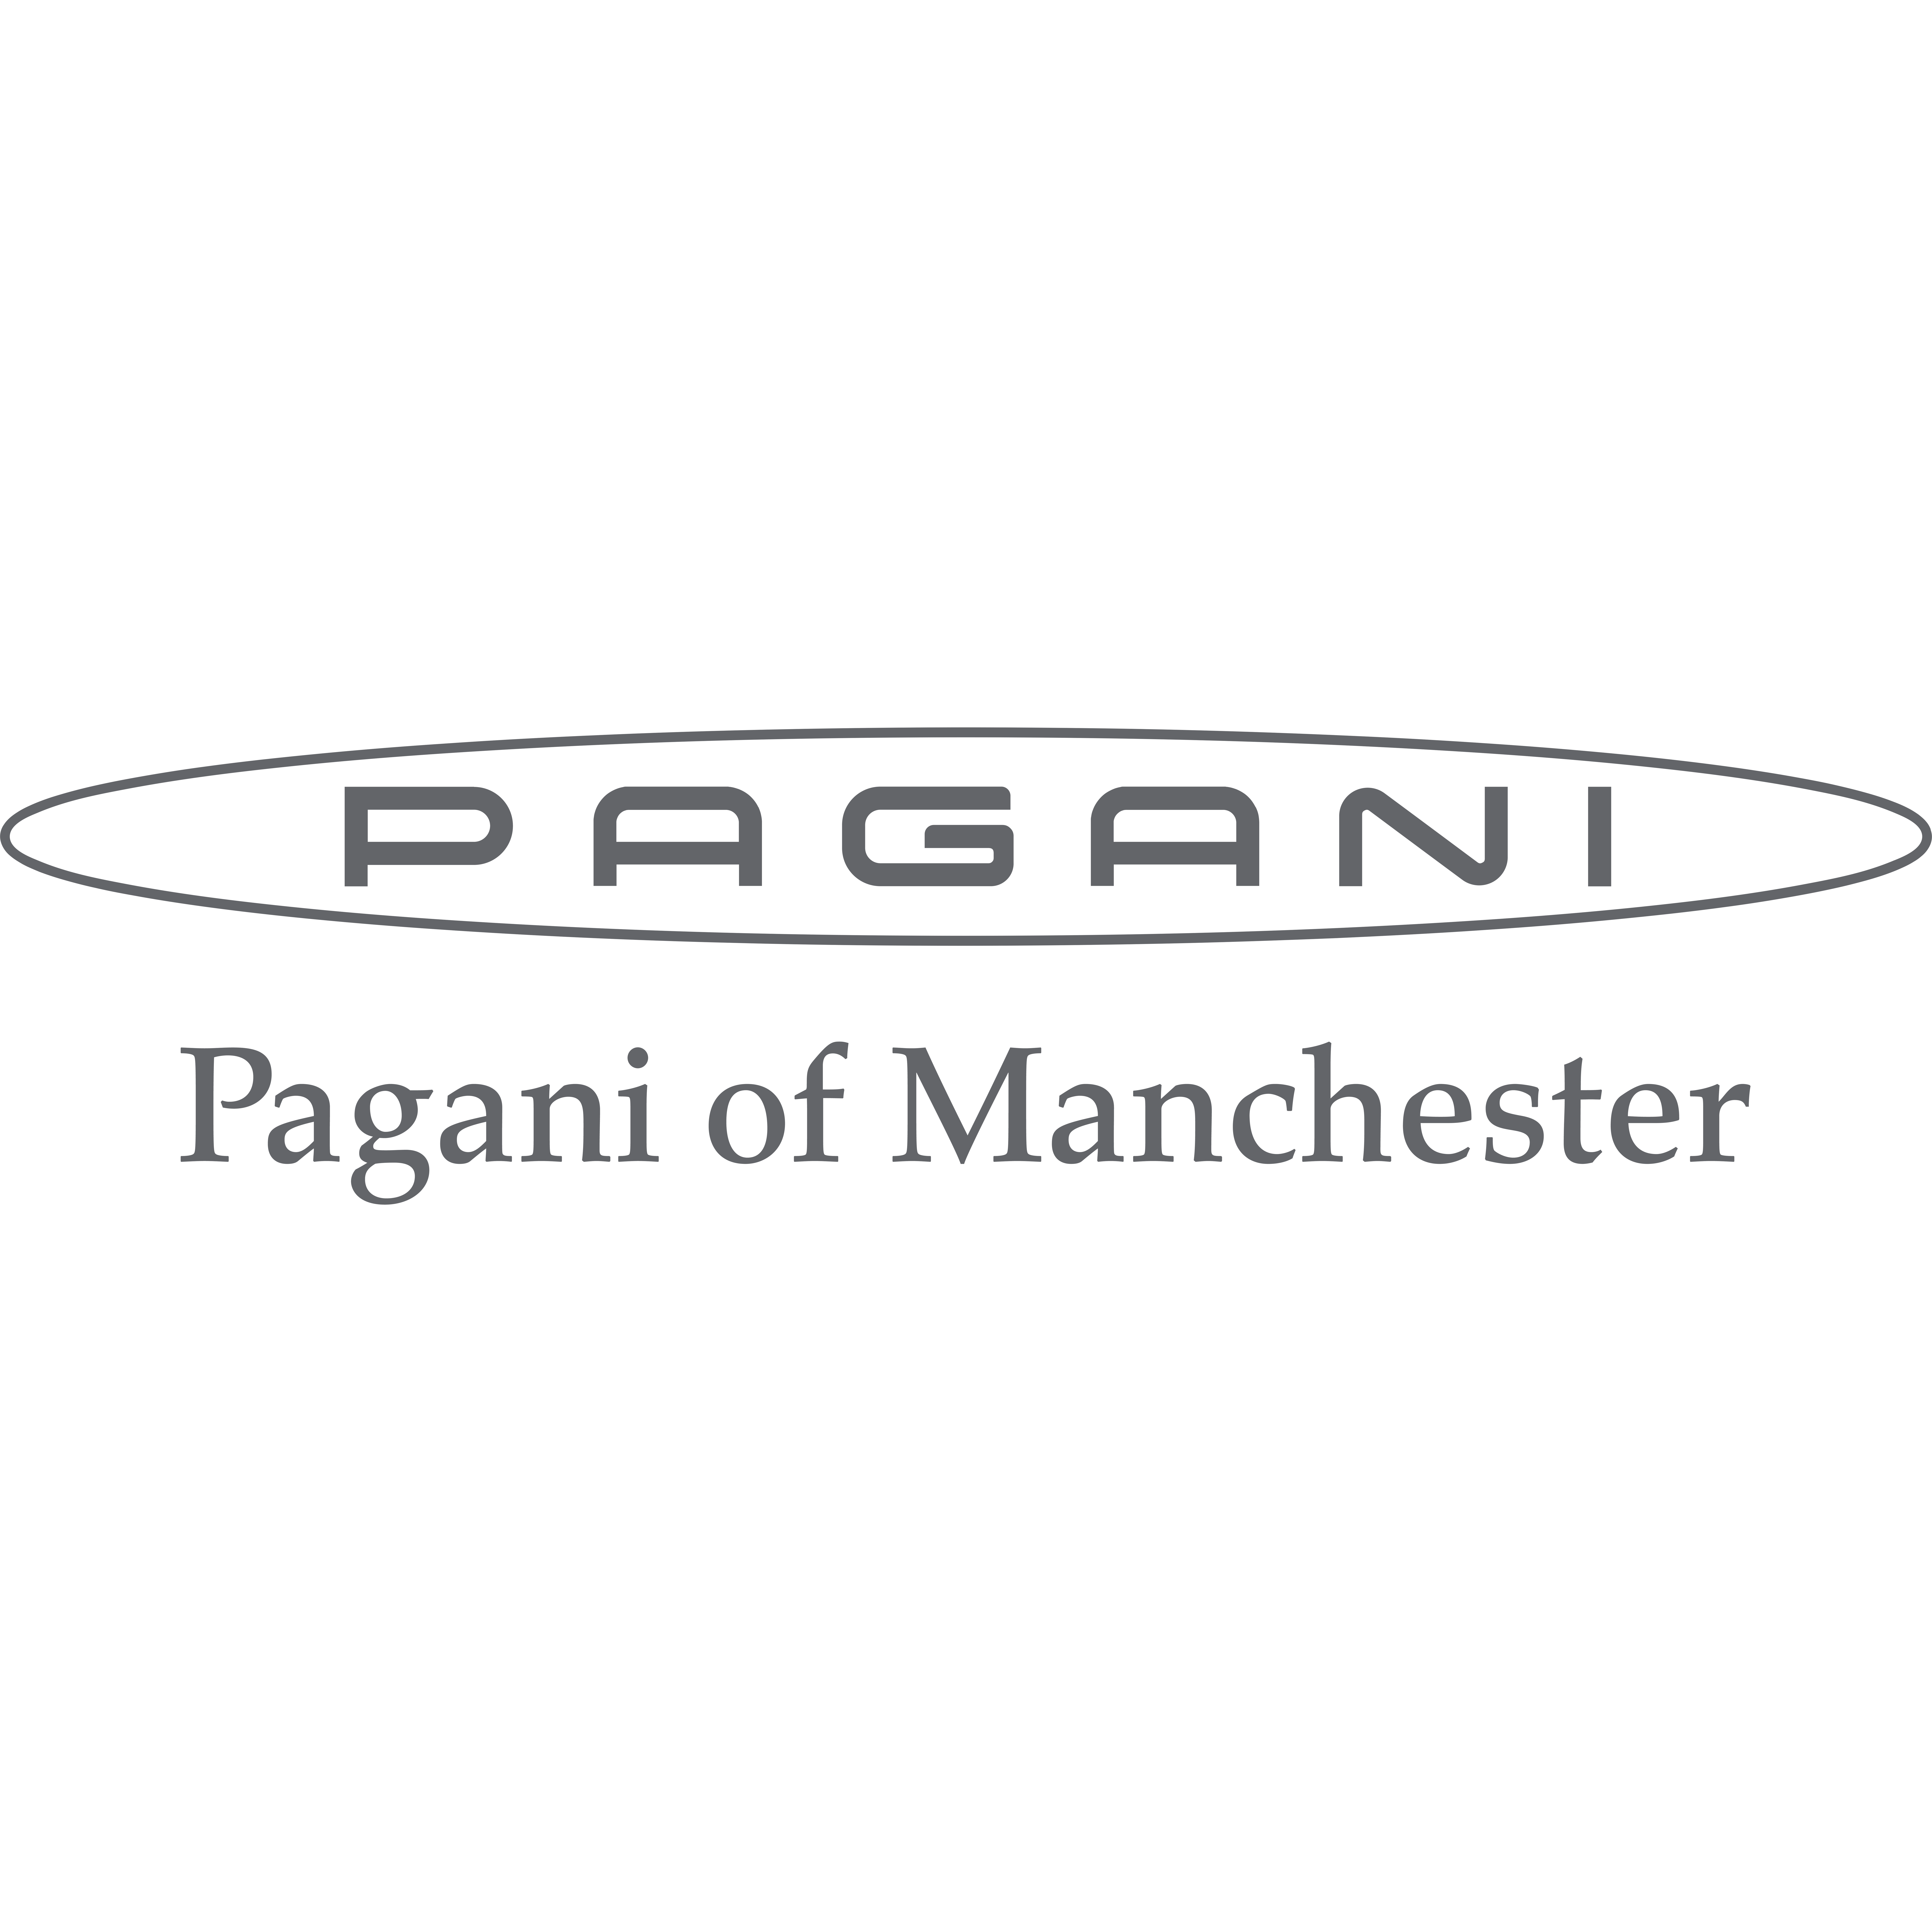 Pagani of Manchester - Wilmslow, Cheshire SK9 3FB - 01625 416270 | ShowMeLocal.com